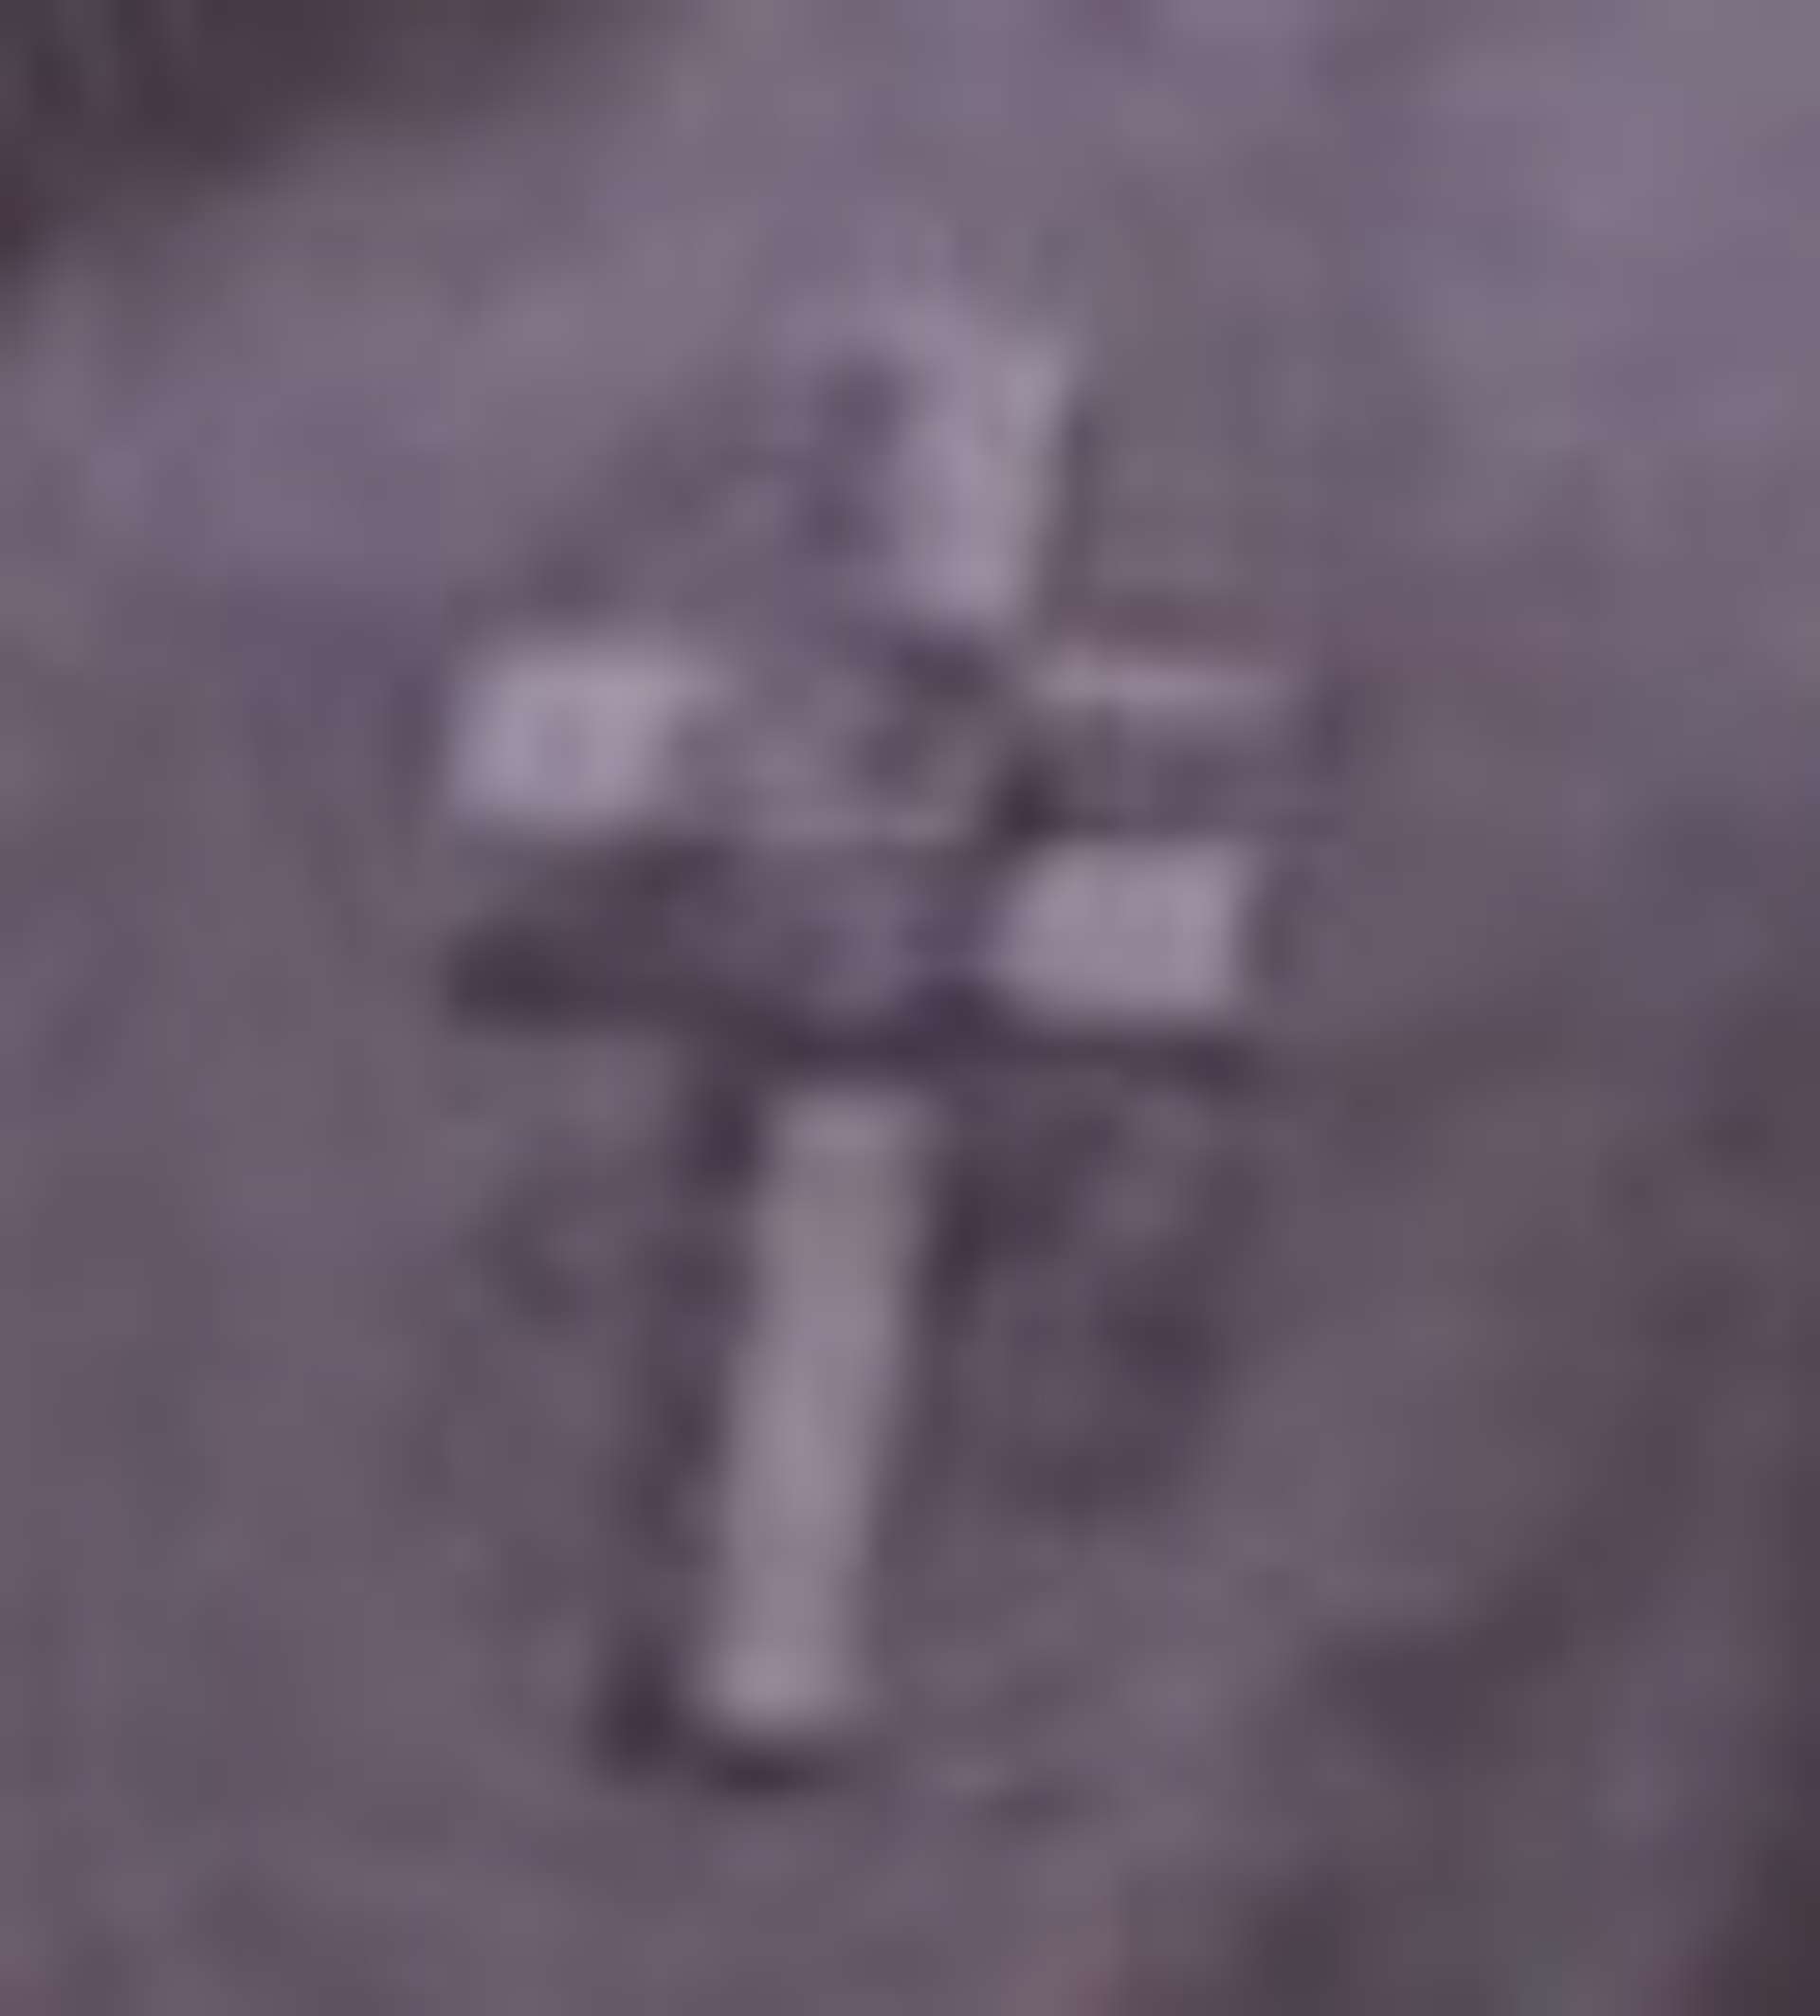 Calvary cross on the chest of Laylah 2